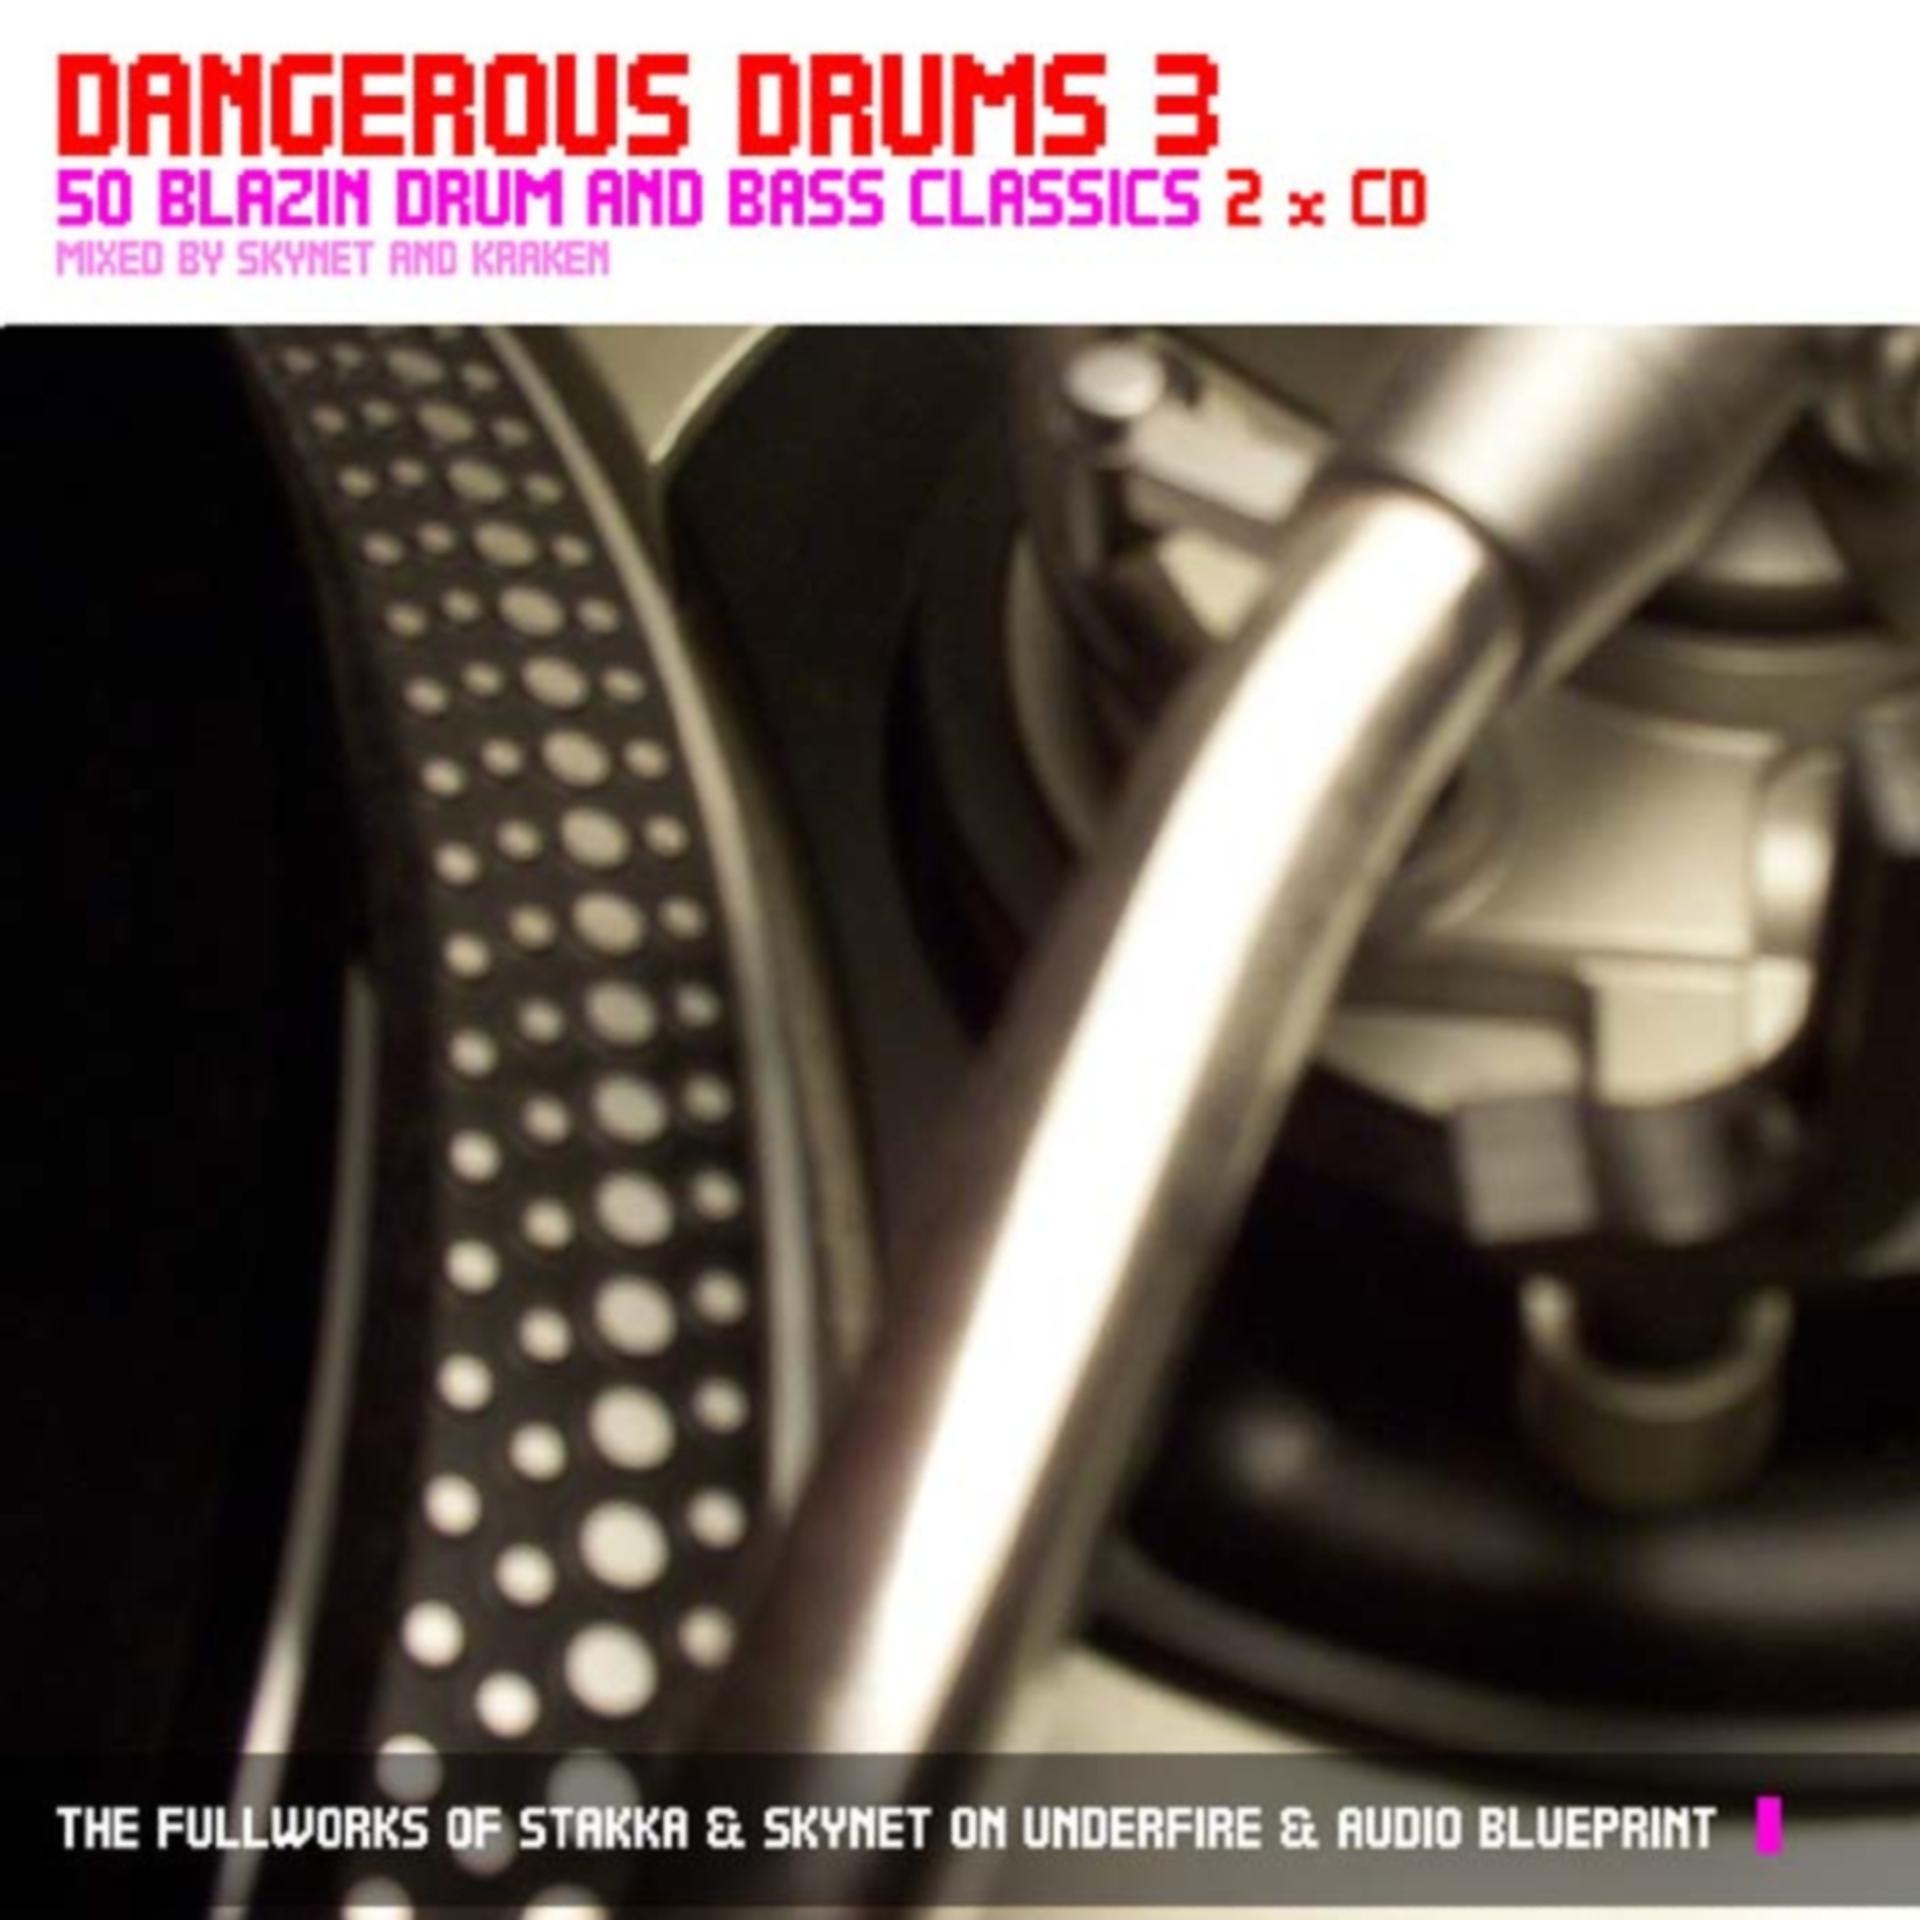 Постер альбома Dangerous Drums 3 (Disc 1) - Mixed by Stakka